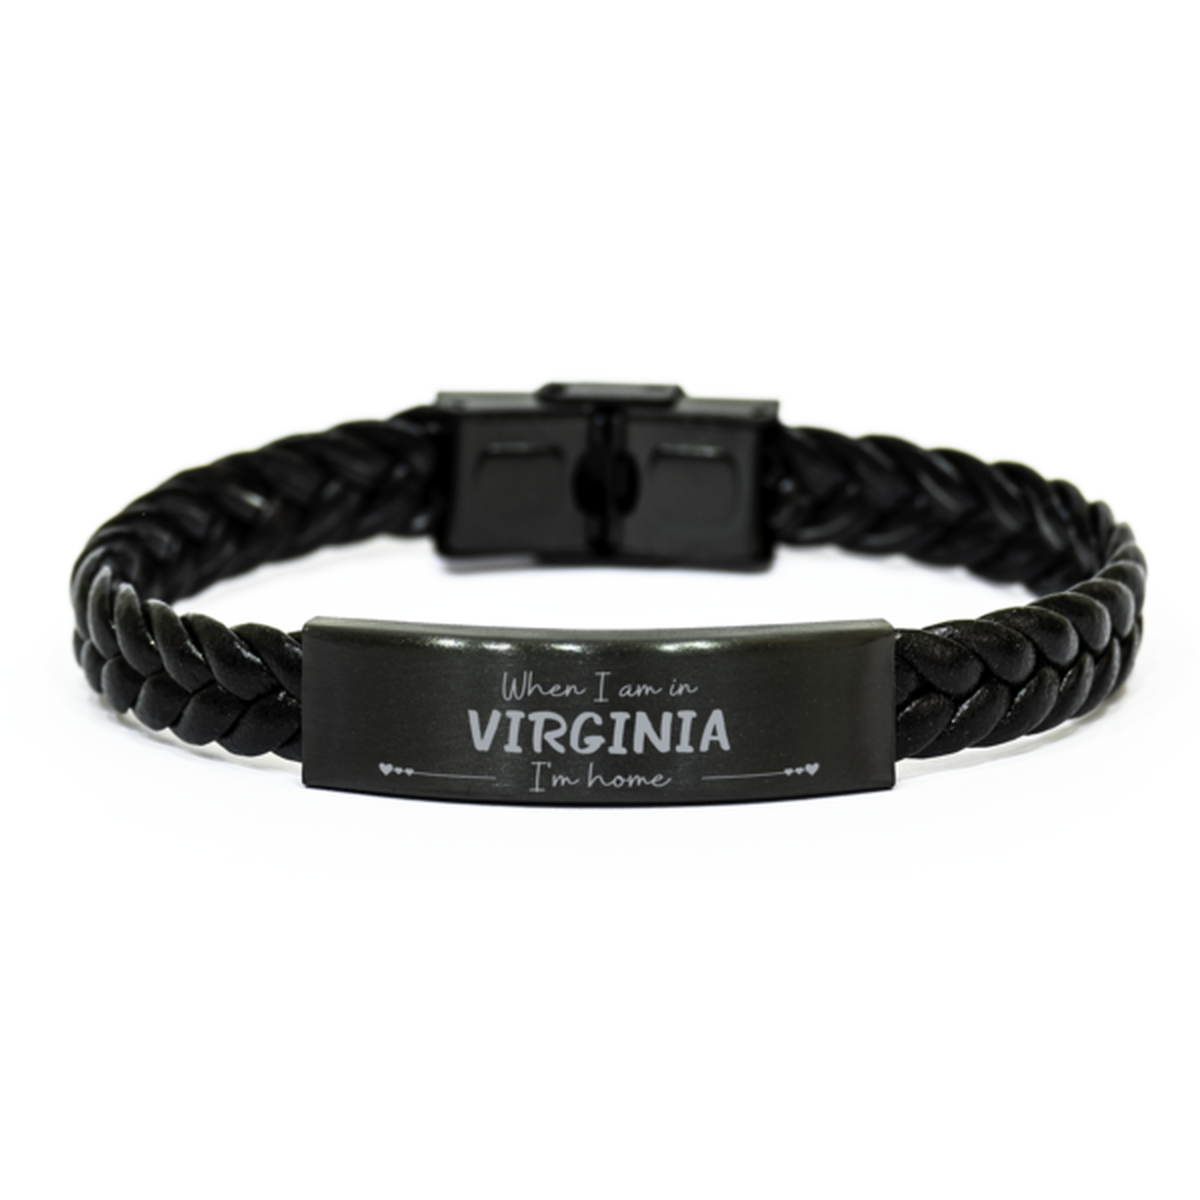 When I am in Virginia I'm home Braided Leather Bracelet, Cheap Gifts For Virginia, State Virginia Birthday Gifts for Friends Coworker